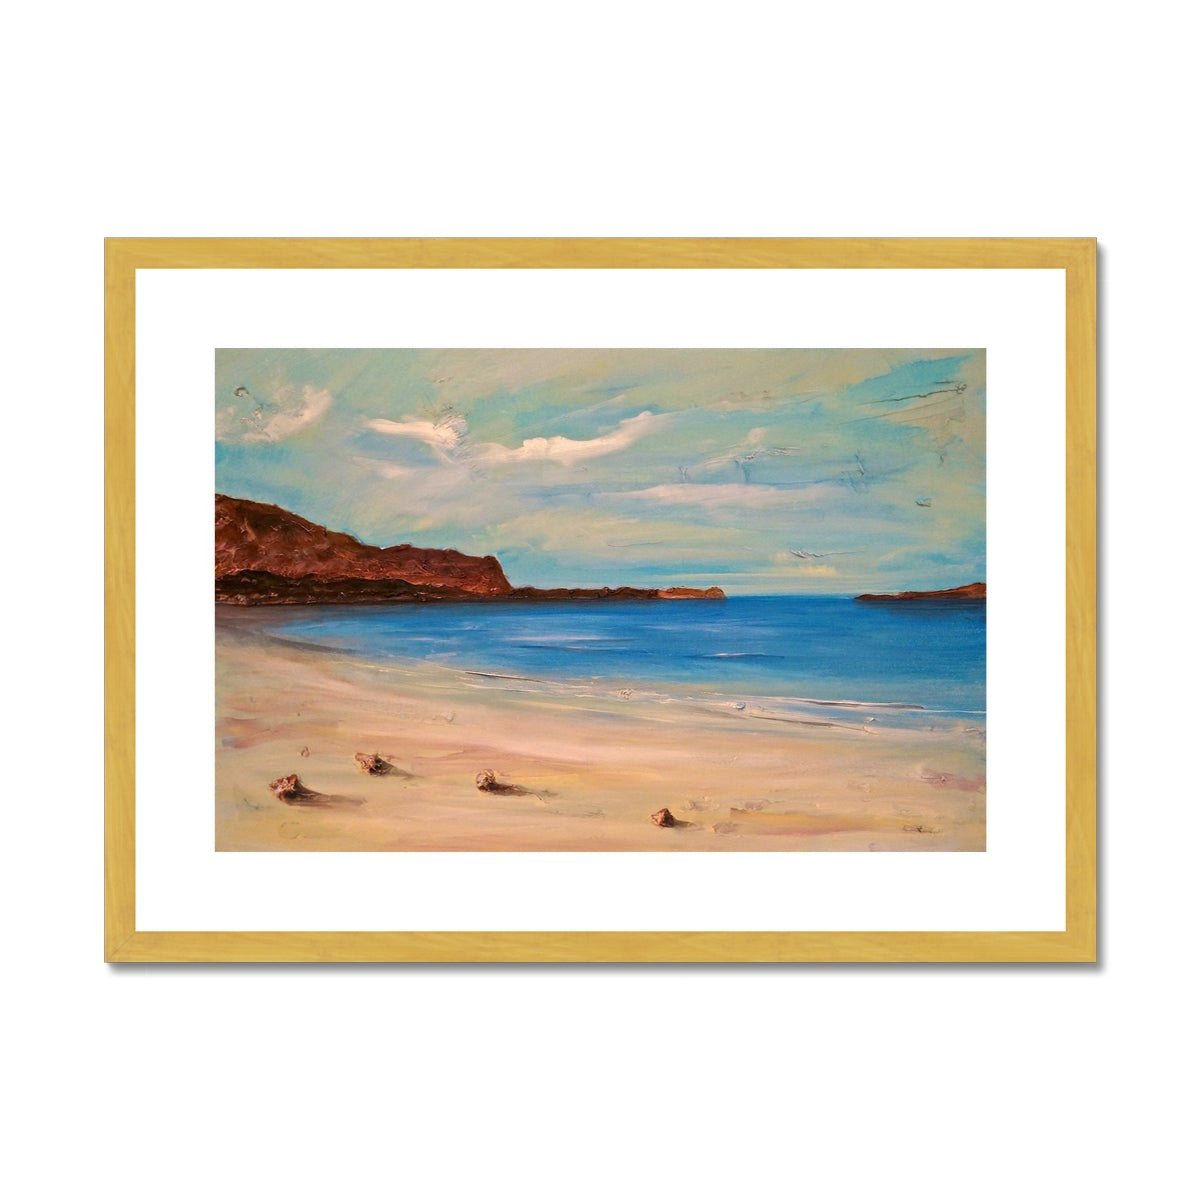 Bosta Beach Lewis Painting | Antique Framed & Mounted Prints From Scotland-Antique Framed & Mounted Prints-Hebridean Islands Art Gallery-A2 Landscape-Gold Frame-Paintings, Prints, Homeware, Art Gifts From Scotland By Scottish Artist Kevin Hunter